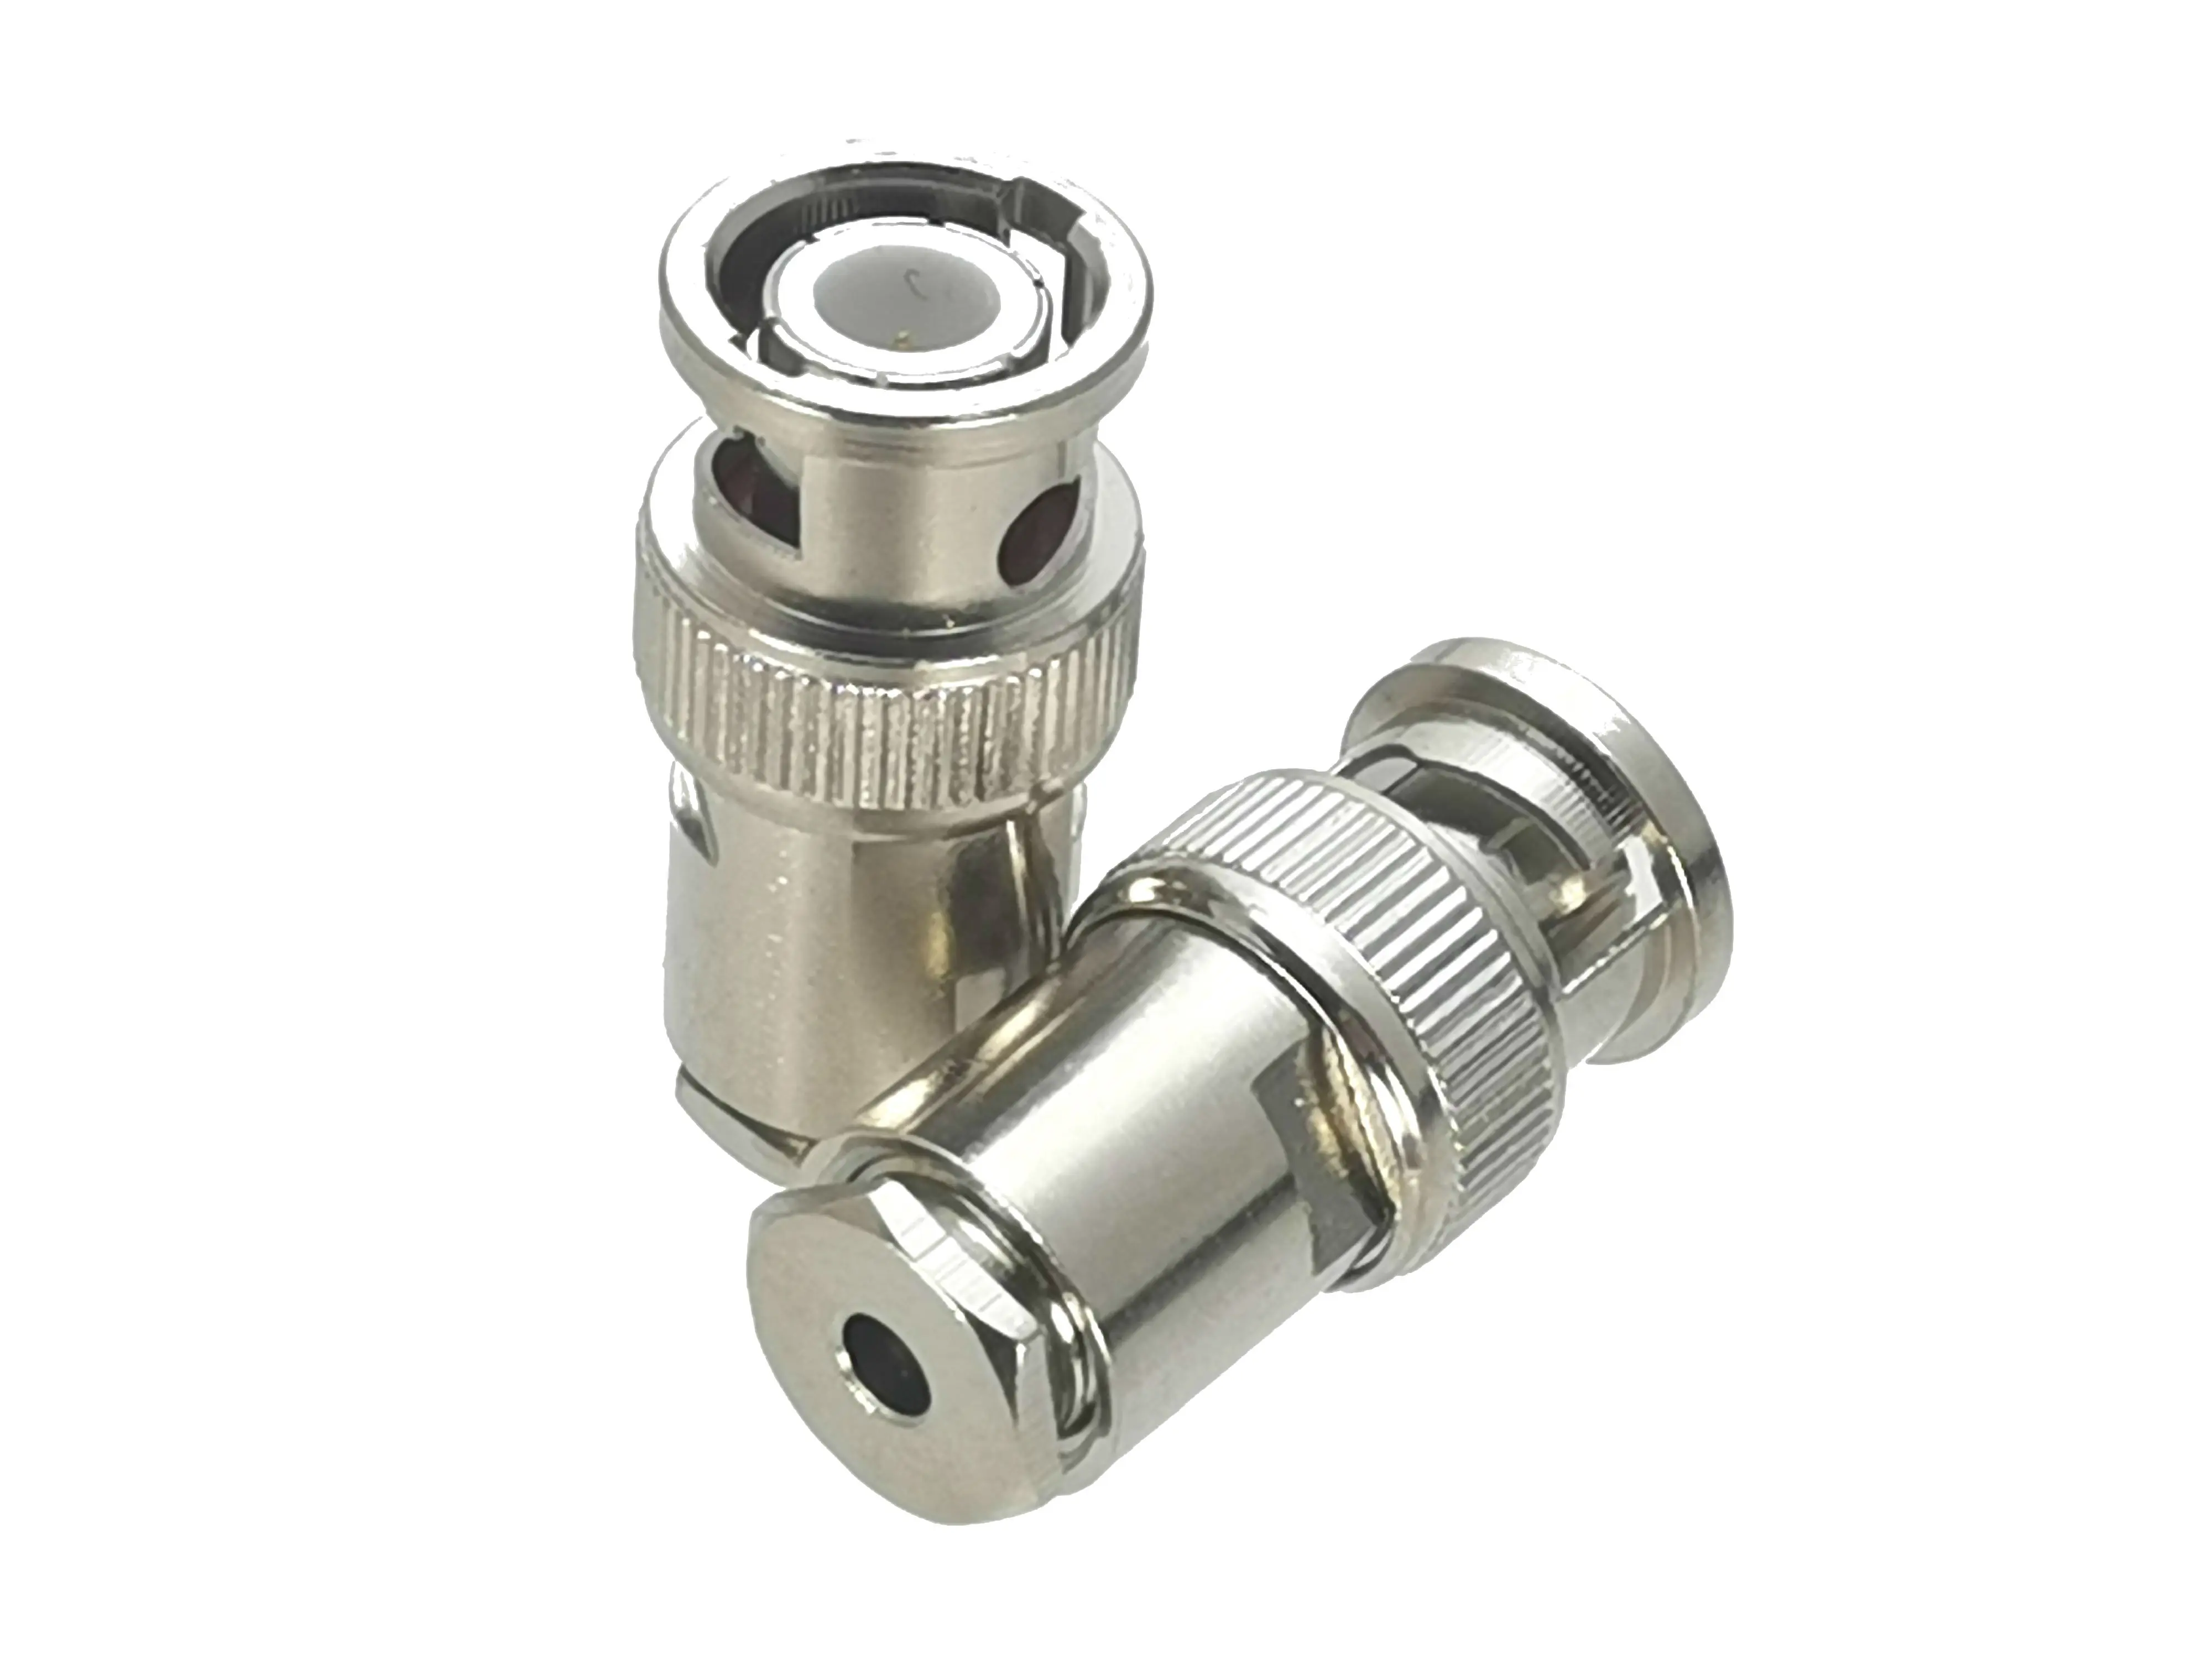 

10Pcs Connector BNC Male plug Clamp RG316 RG174 LMR100 Cable RF Adapter Coaxial High Quanlity 50ohm Brass